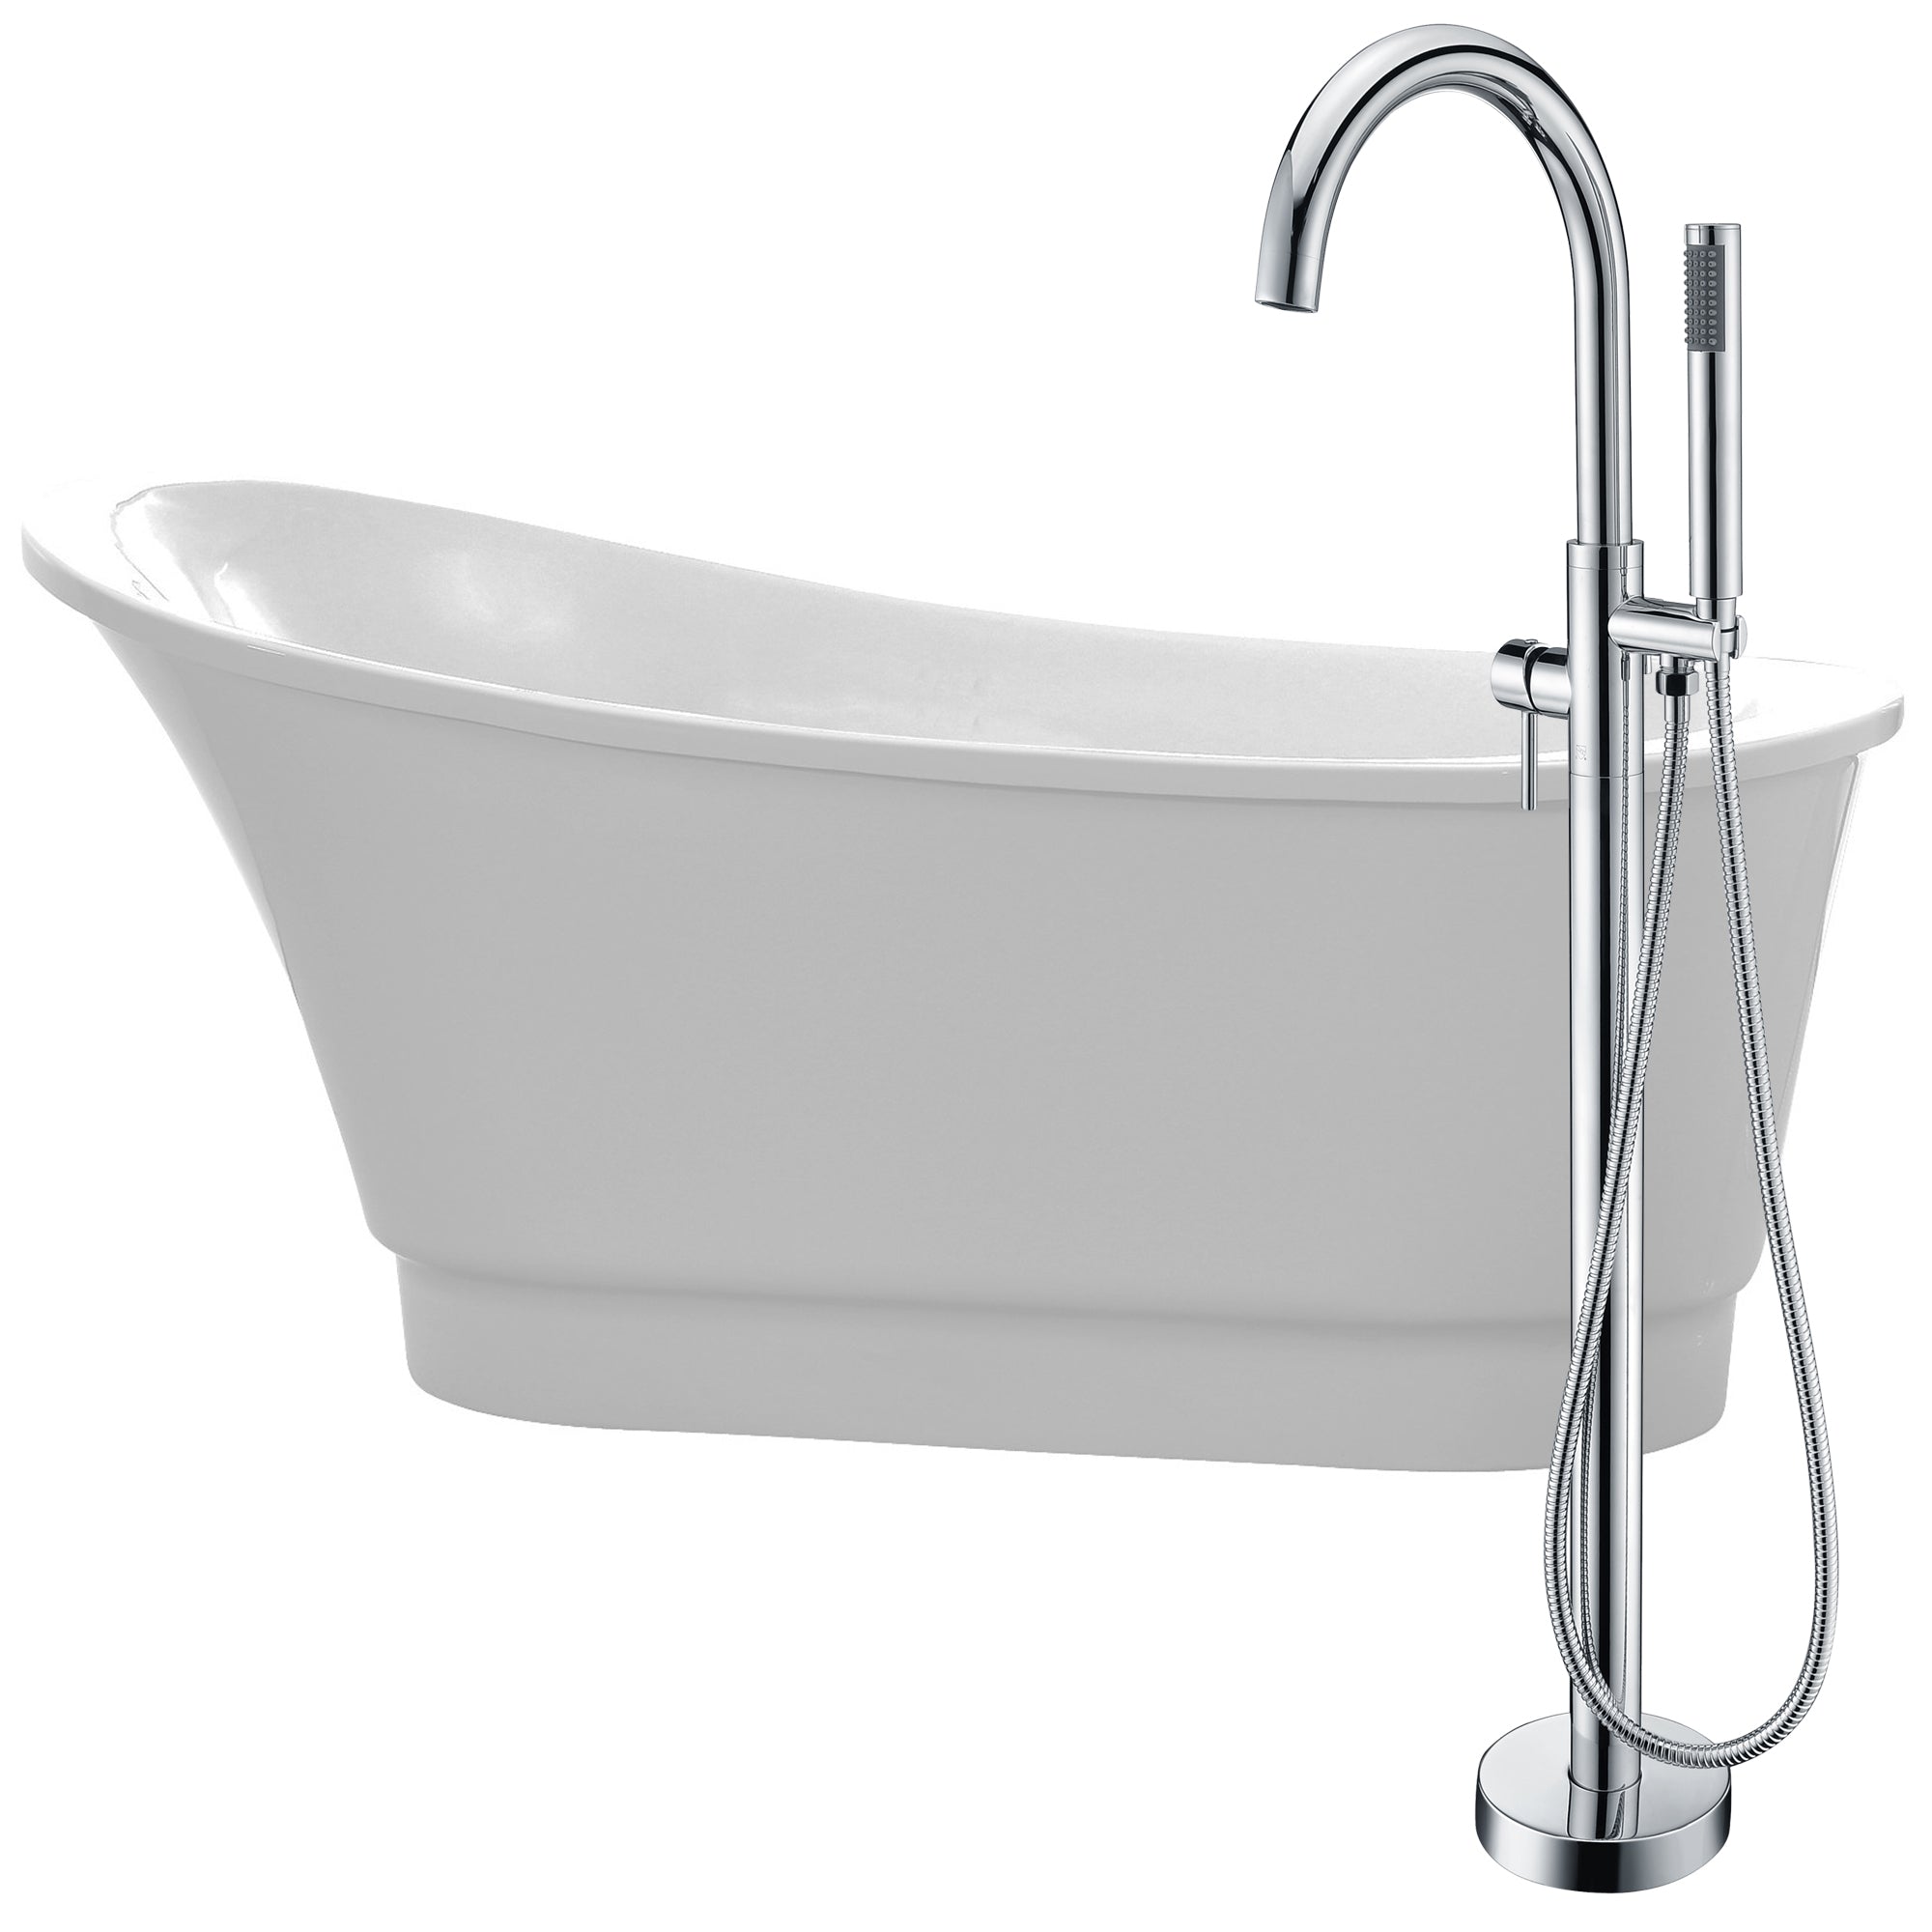 Anzzi Prima 67 in. Acrylic Flatbottom Non-Whirlpool Bathtub in Glossy White with Kros Faucet and Hand Shower in Polished Chrome FTAZ095 - Vital Hydrotherapy